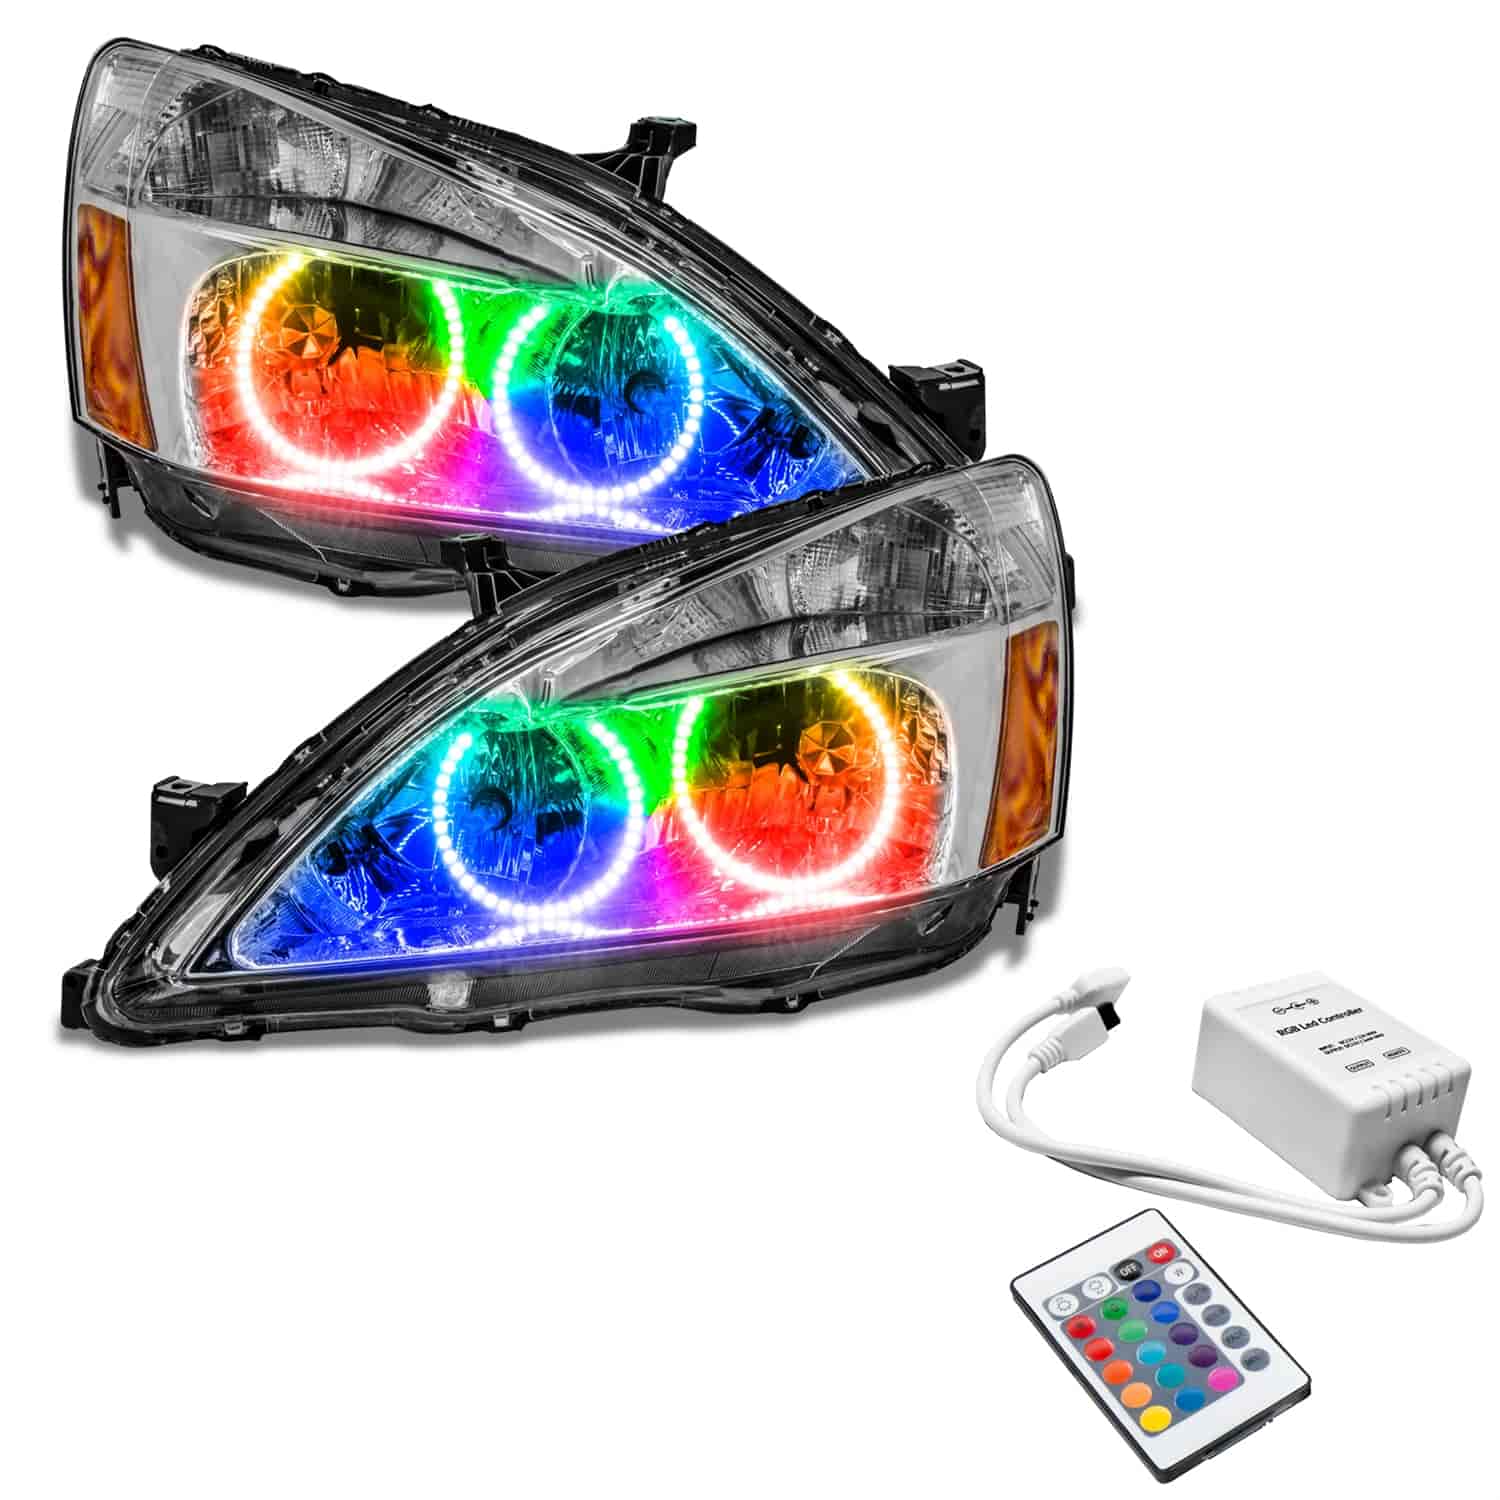 Product Name Colorshift Halo Headlight Assemblies [Simple RGB Controller w/Remote] For 2003-2007 Honda Accord Coupe/Sedan